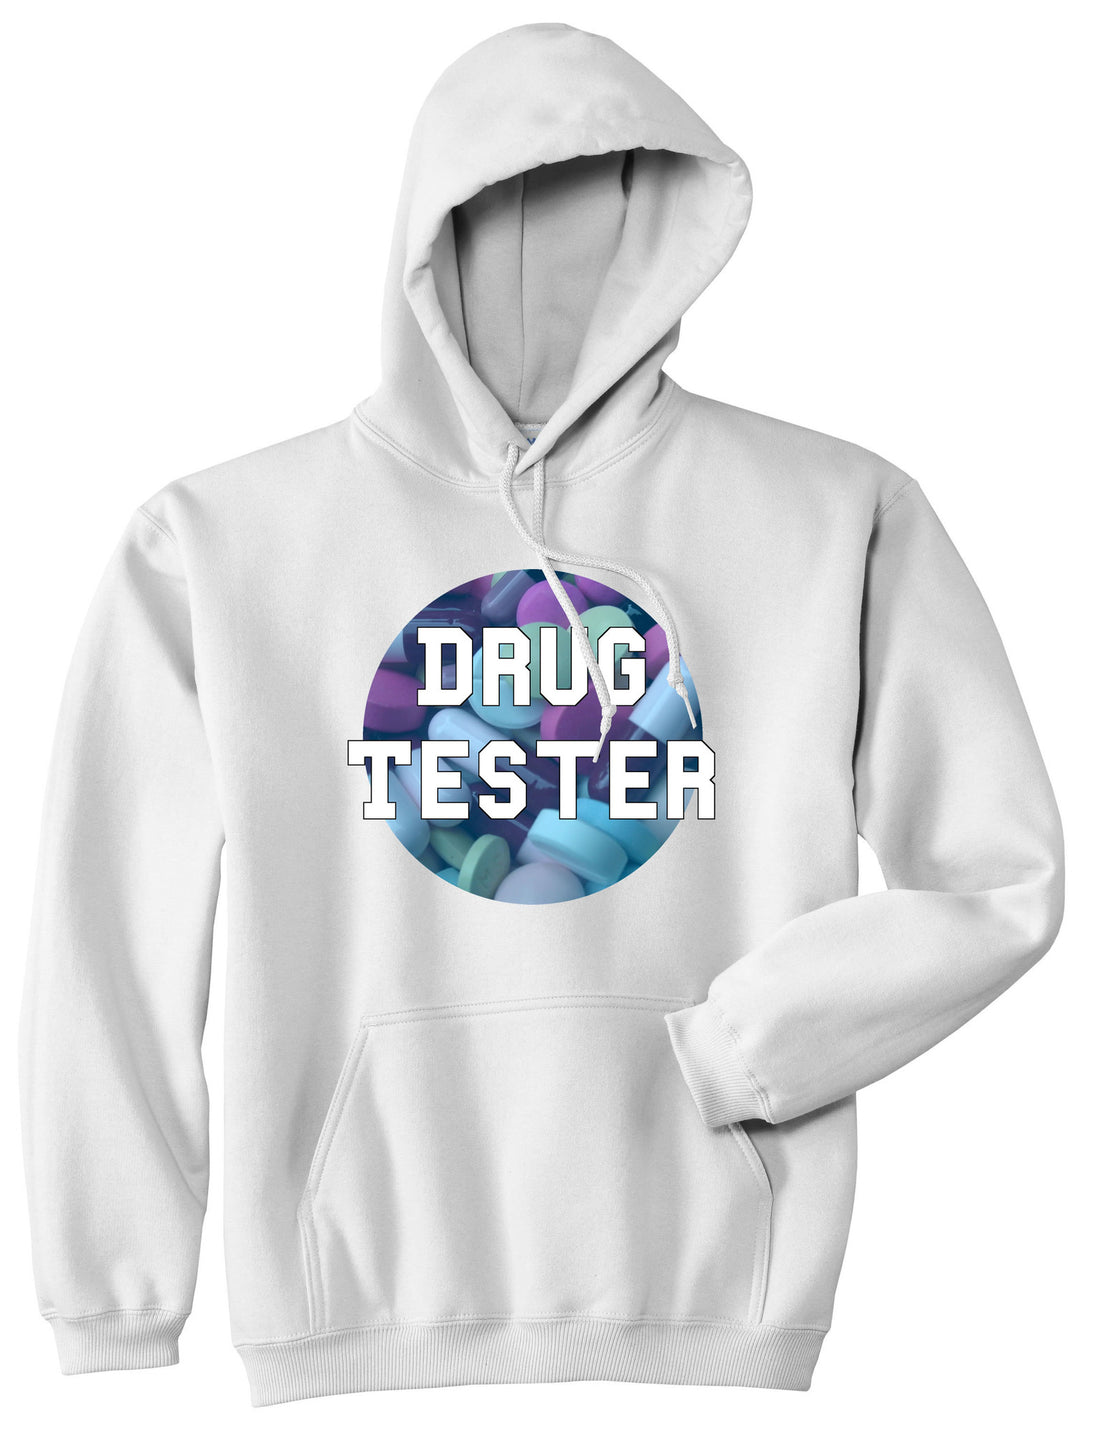 Drug tester weed smoking funny college Boys Kids Pullover Hoodie Hoody in White by Kings Of NY